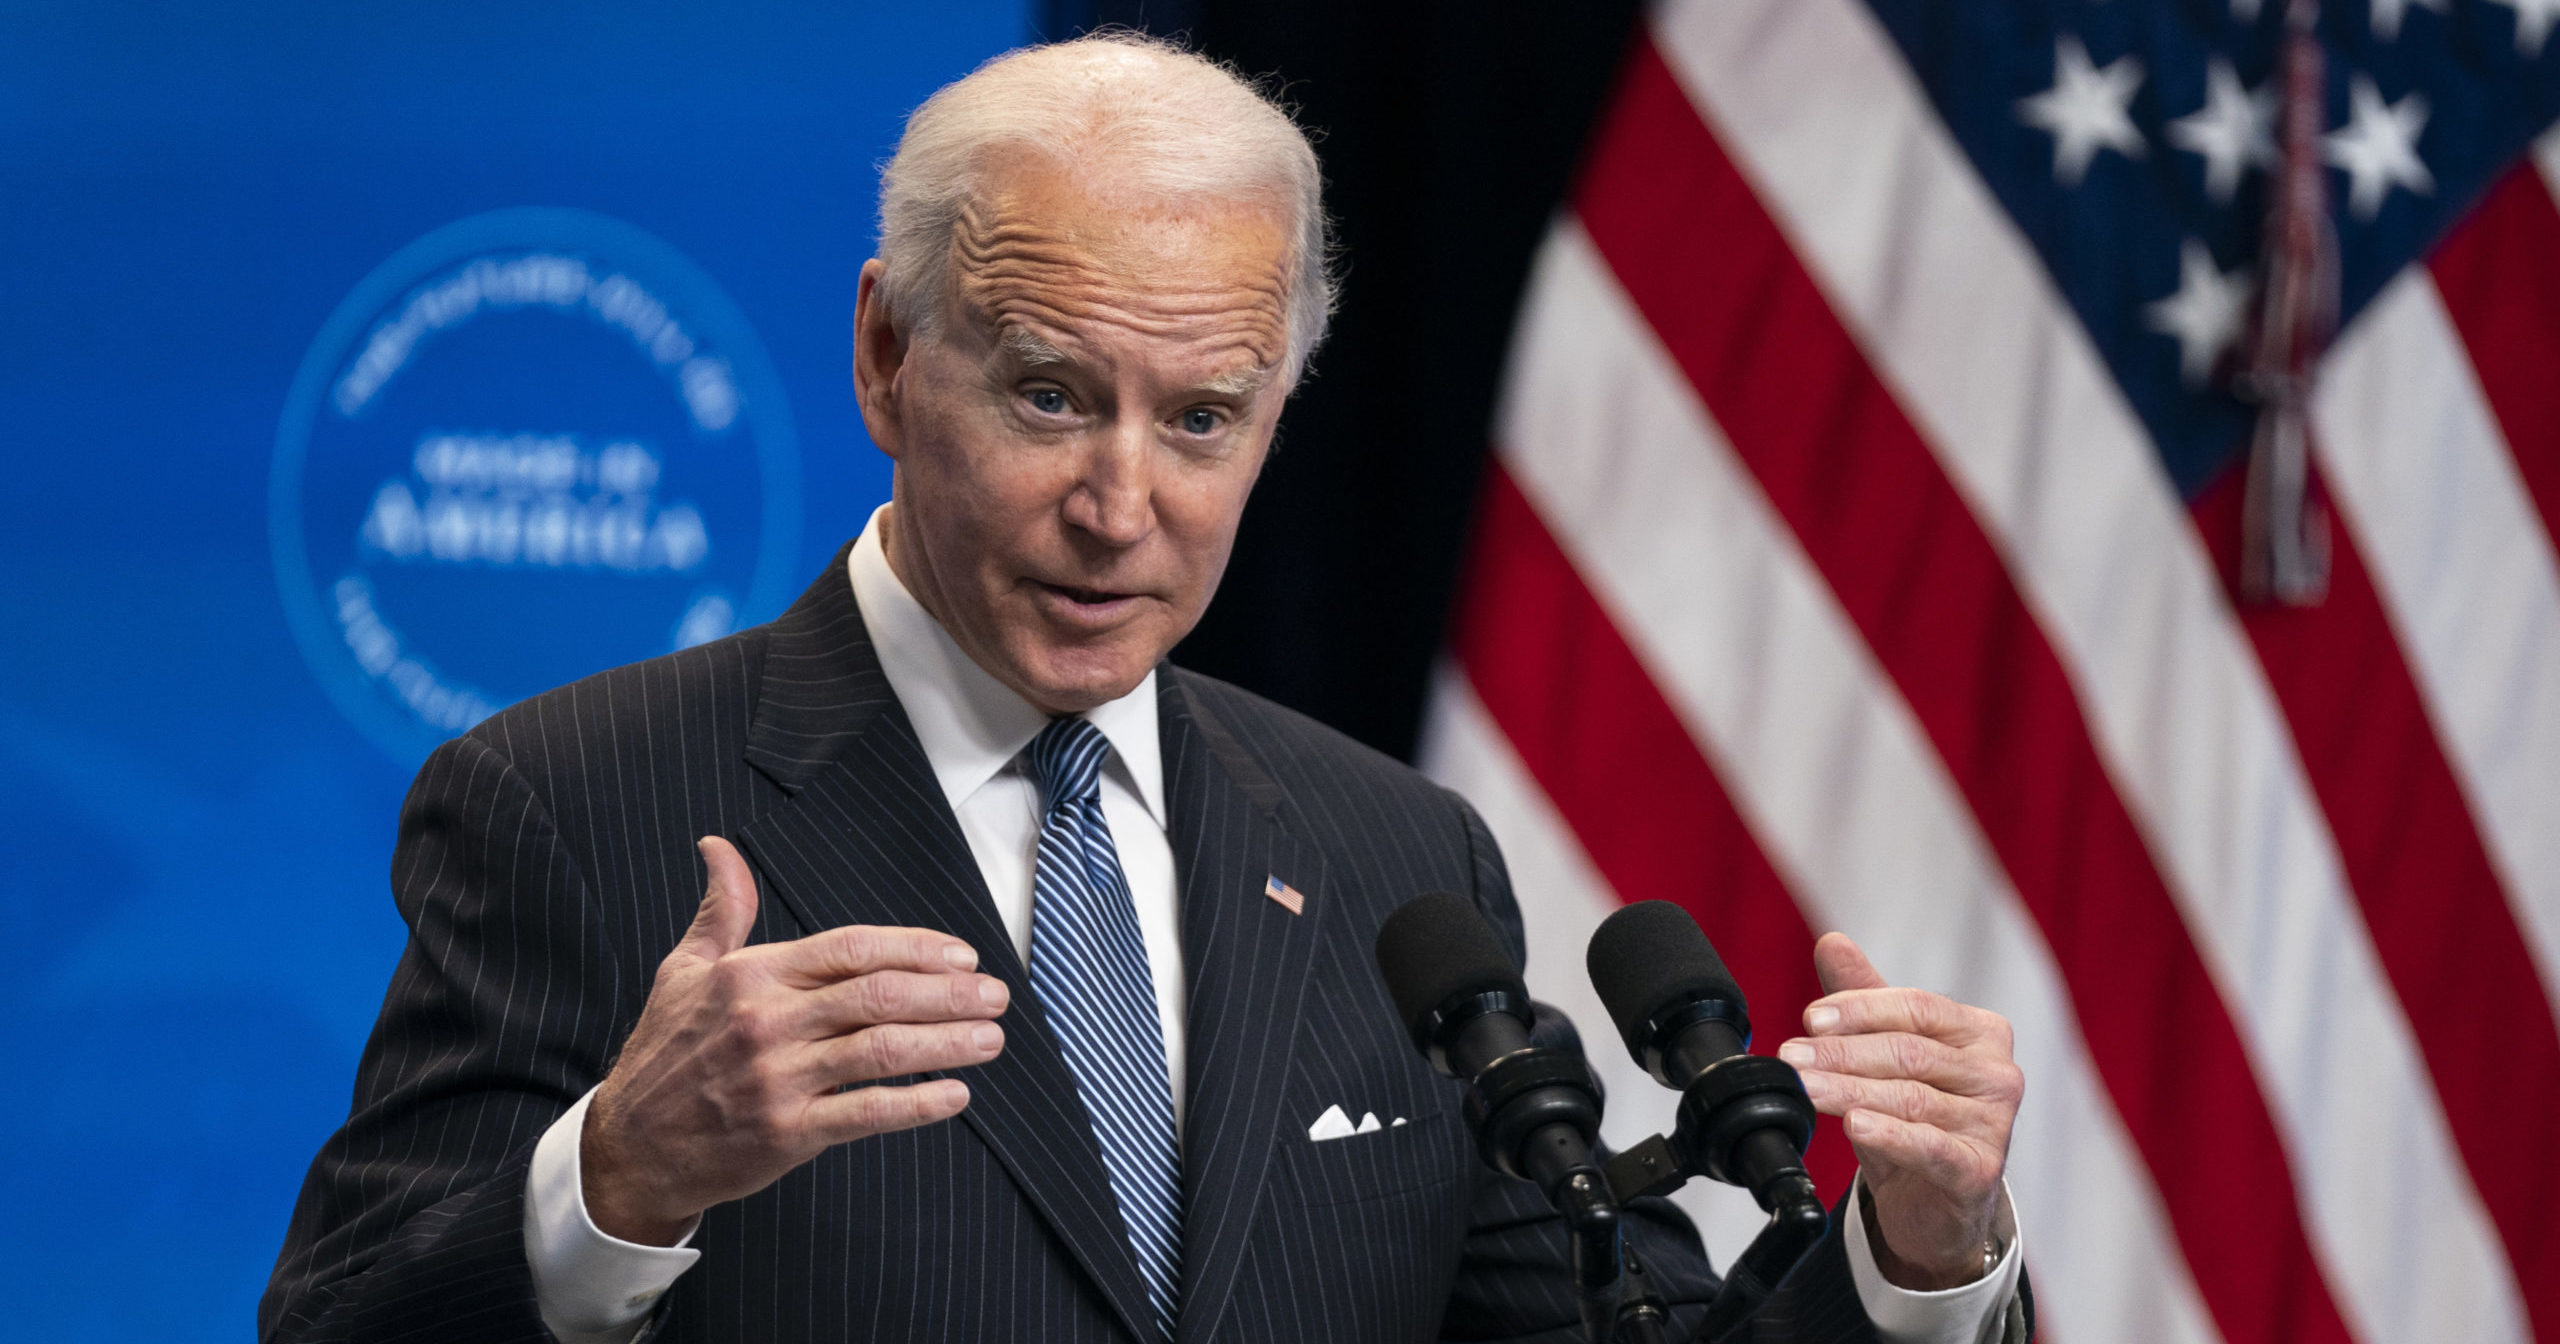 President Joe Biden answers questions from reporters in the White House complex in Washington, D.C., on Jan. 25, 2021.